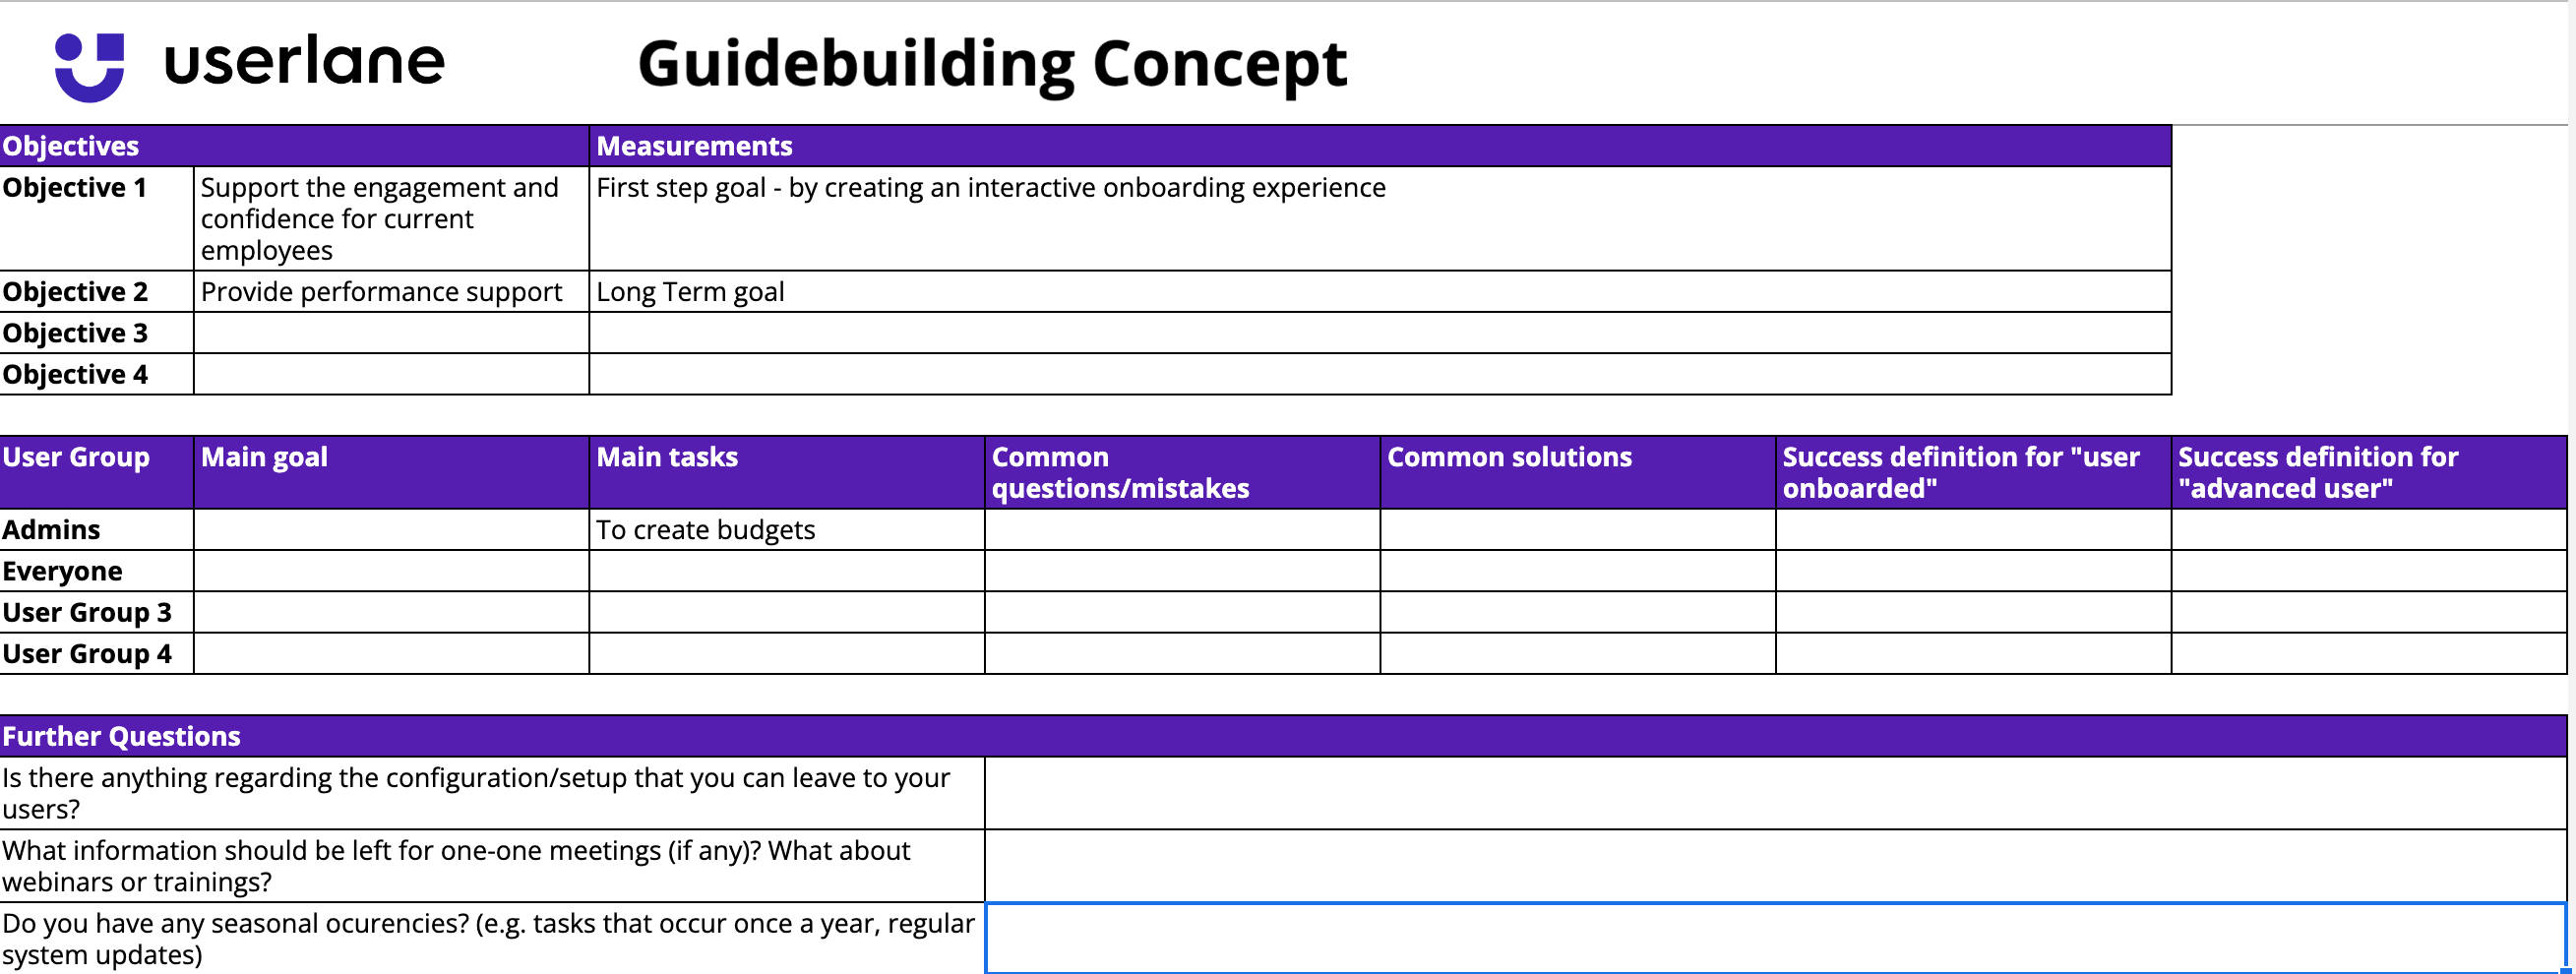 example of guidebuilding concept spreadsheet